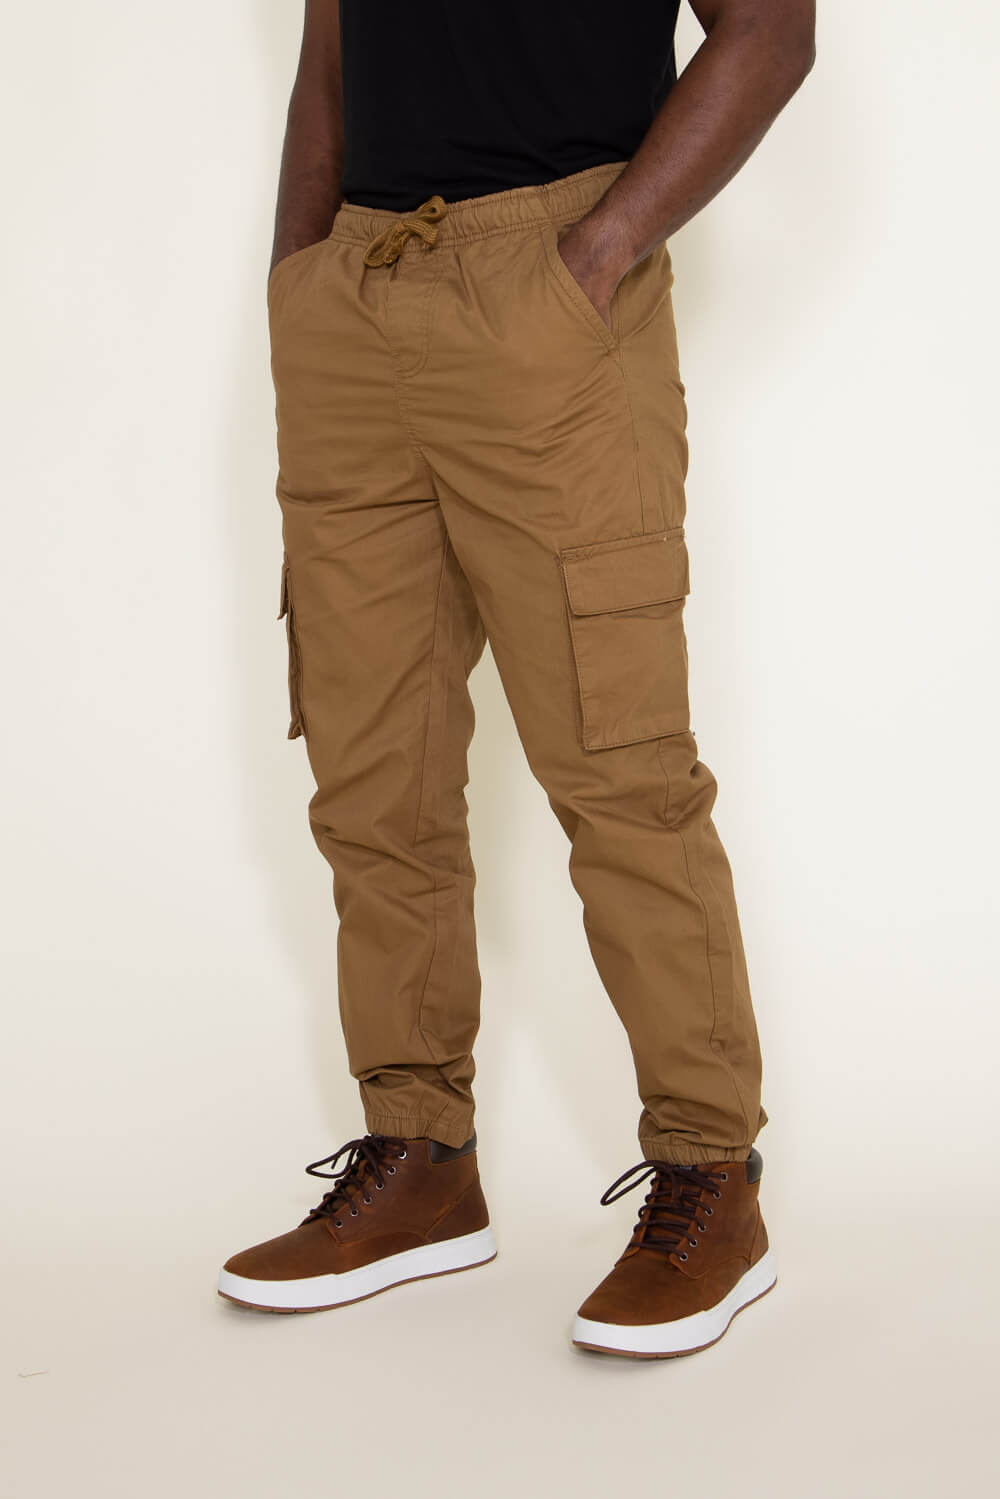 Vintage Low Rise Brown Cargo Pants Men For Men With Multiple Pockets Casual  Solid Color Loose Fit For Daily Wear Style #230504 From Kong003, $20.15 |  DHgate.Com